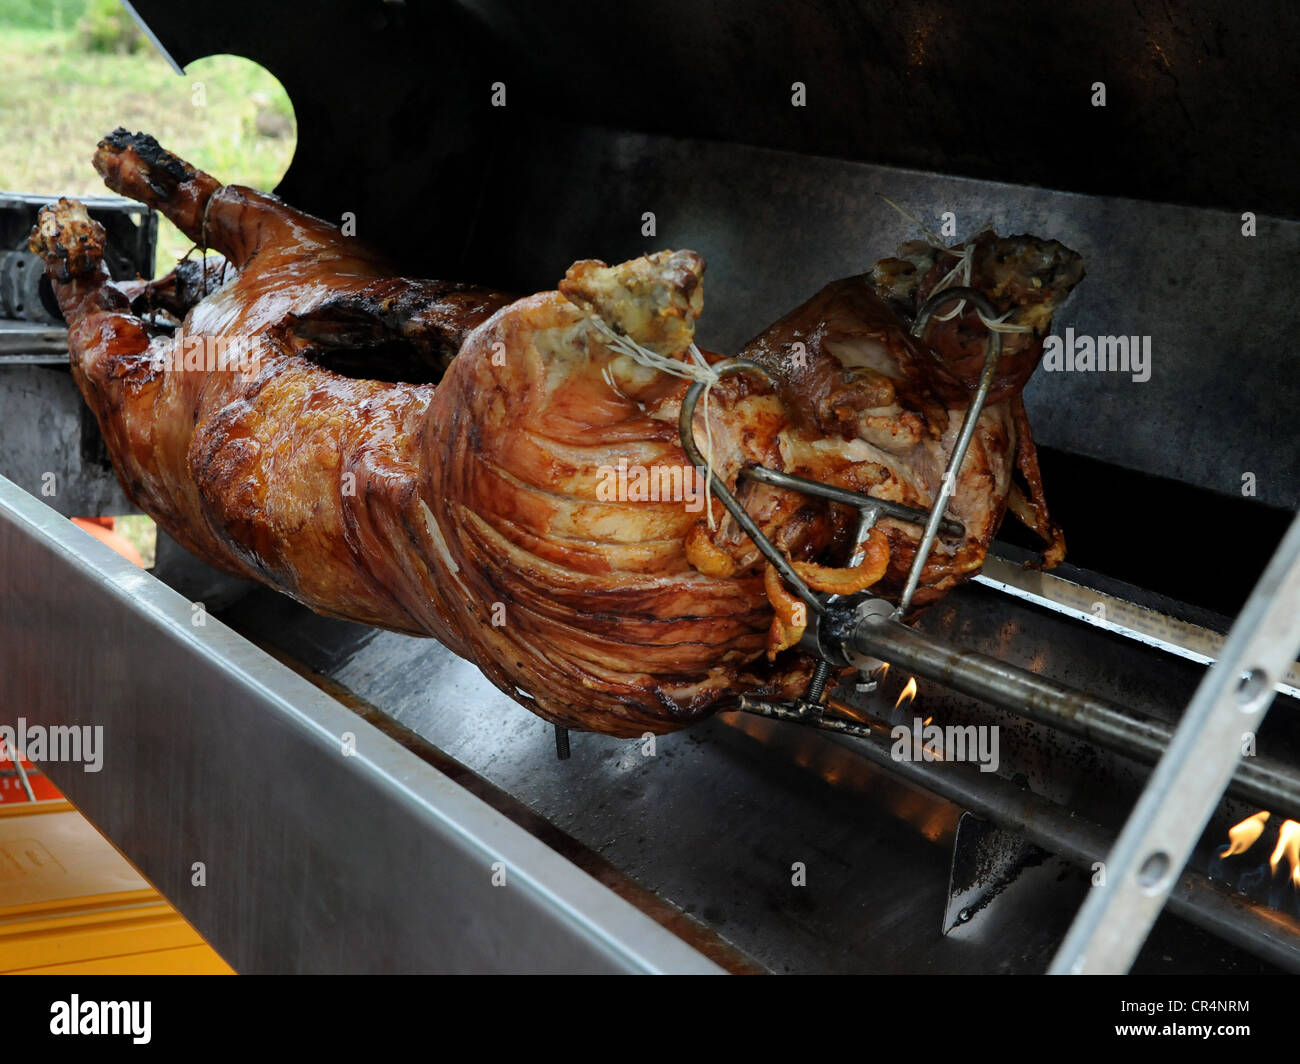 A healthy looking hog roast on a spit being roasted outside. Stock Photo